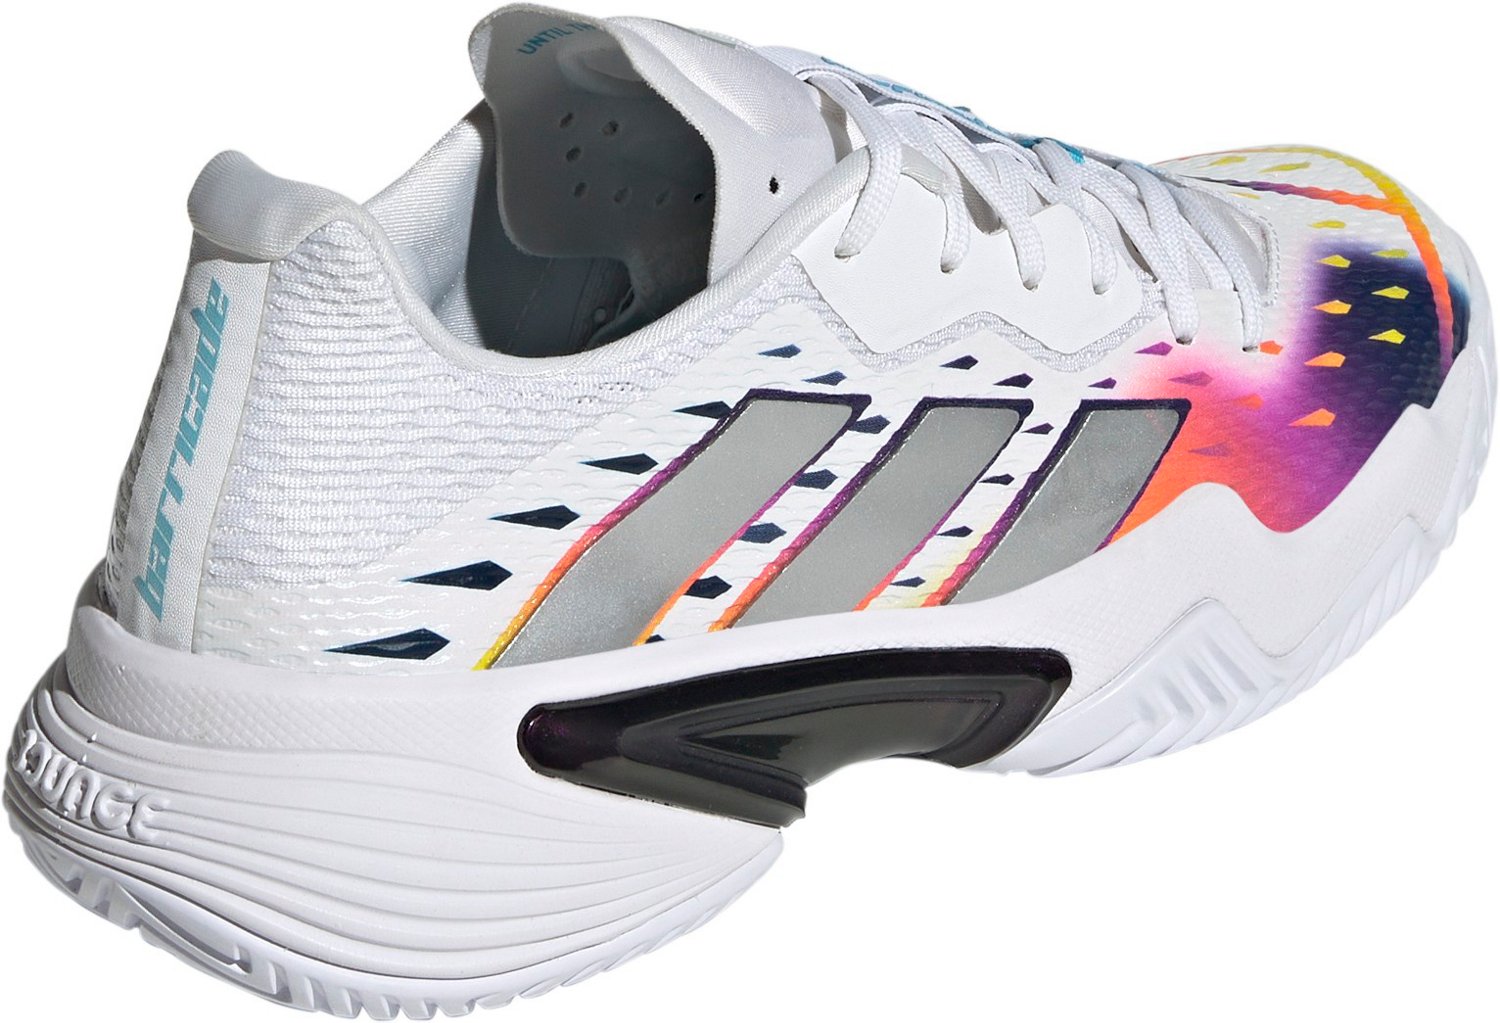 Adidas Womens Barricade Tennis Shoes Free Shipping At Academy 9644